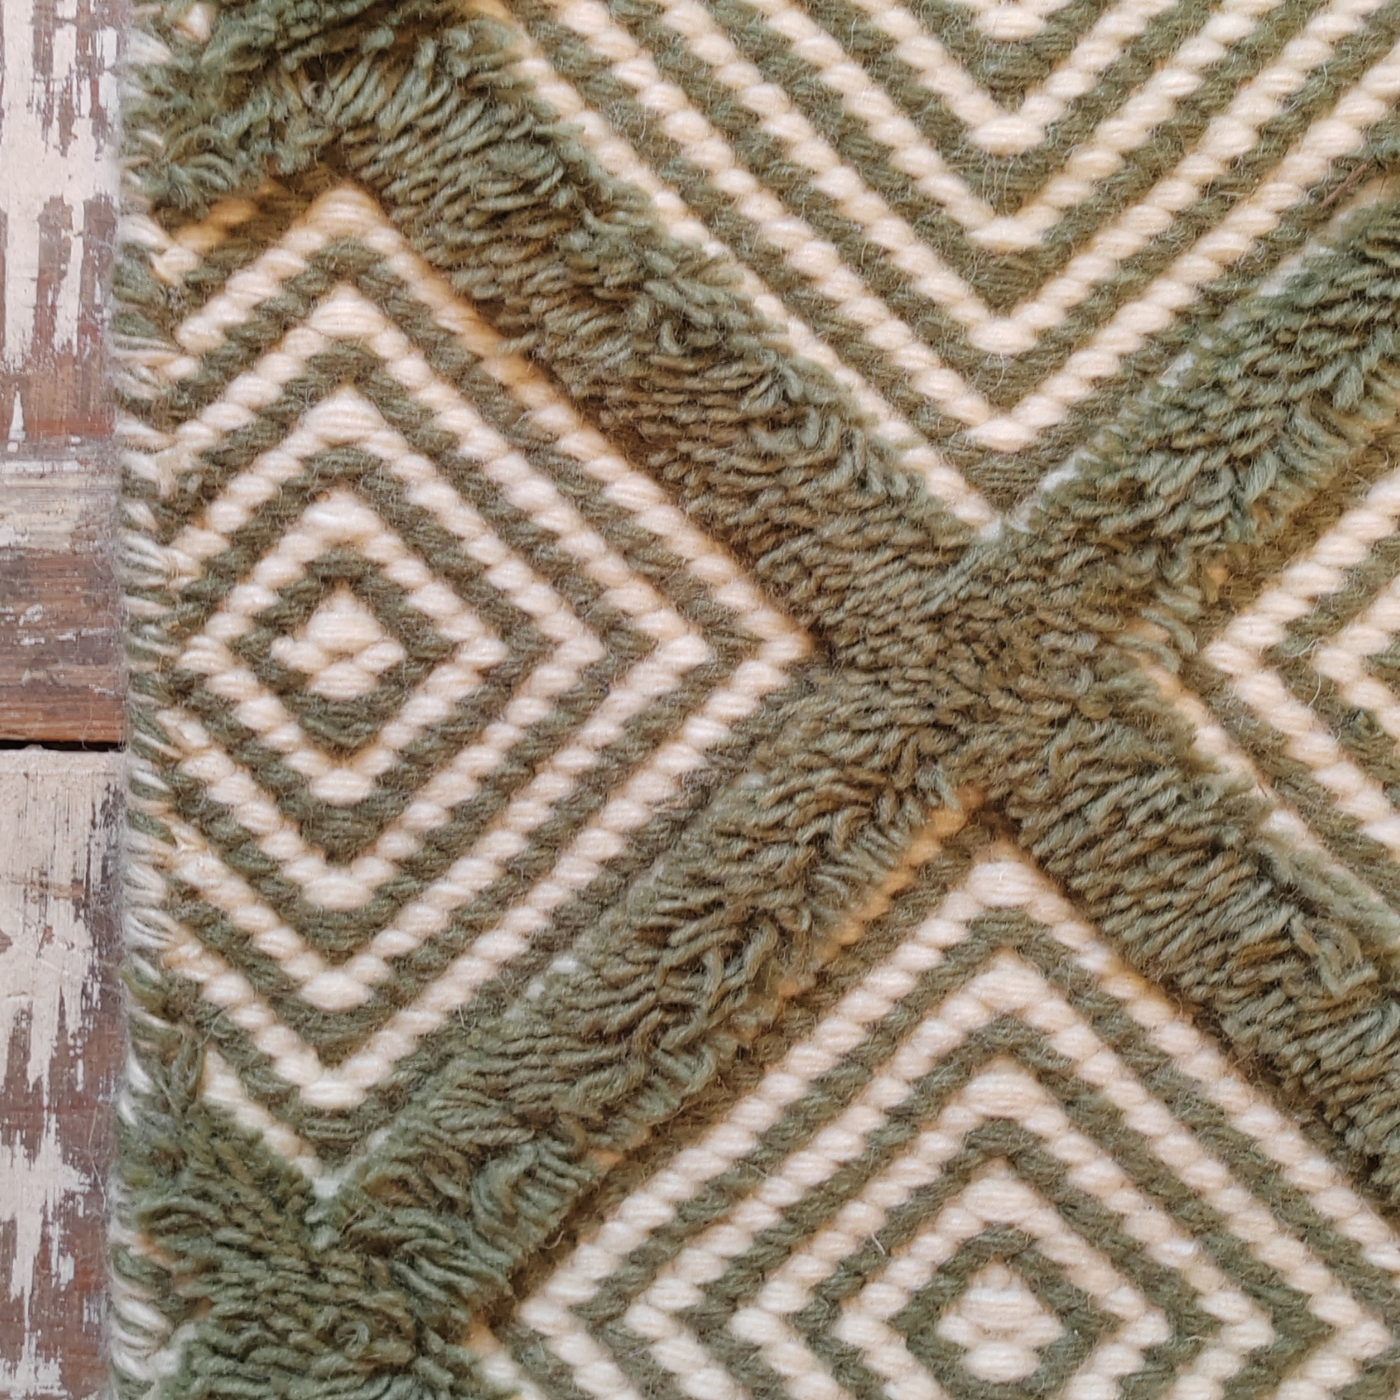 Diamond Tufted Hand Woven Wool Rug - Green & Off-White - 0.8 x 2.5m